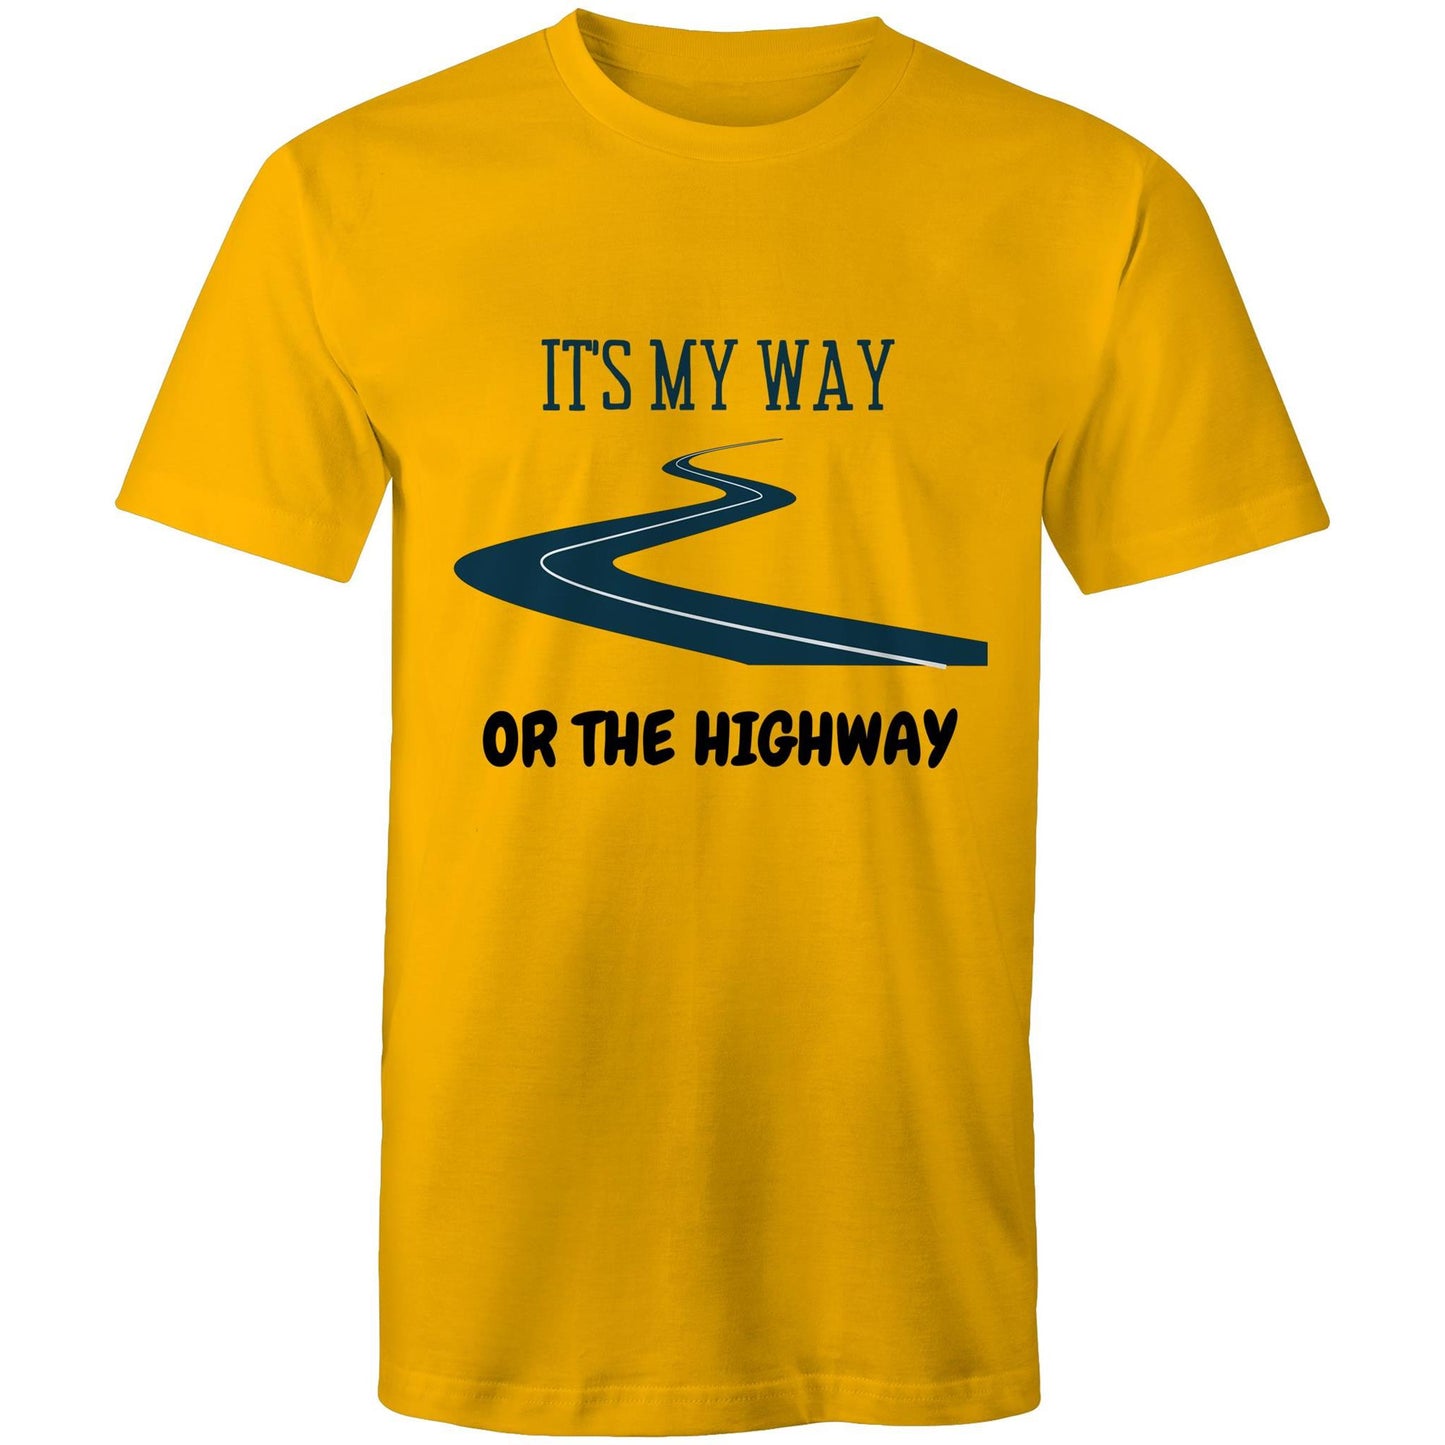 It's My Way Or The Highway - Mens T-Shirt